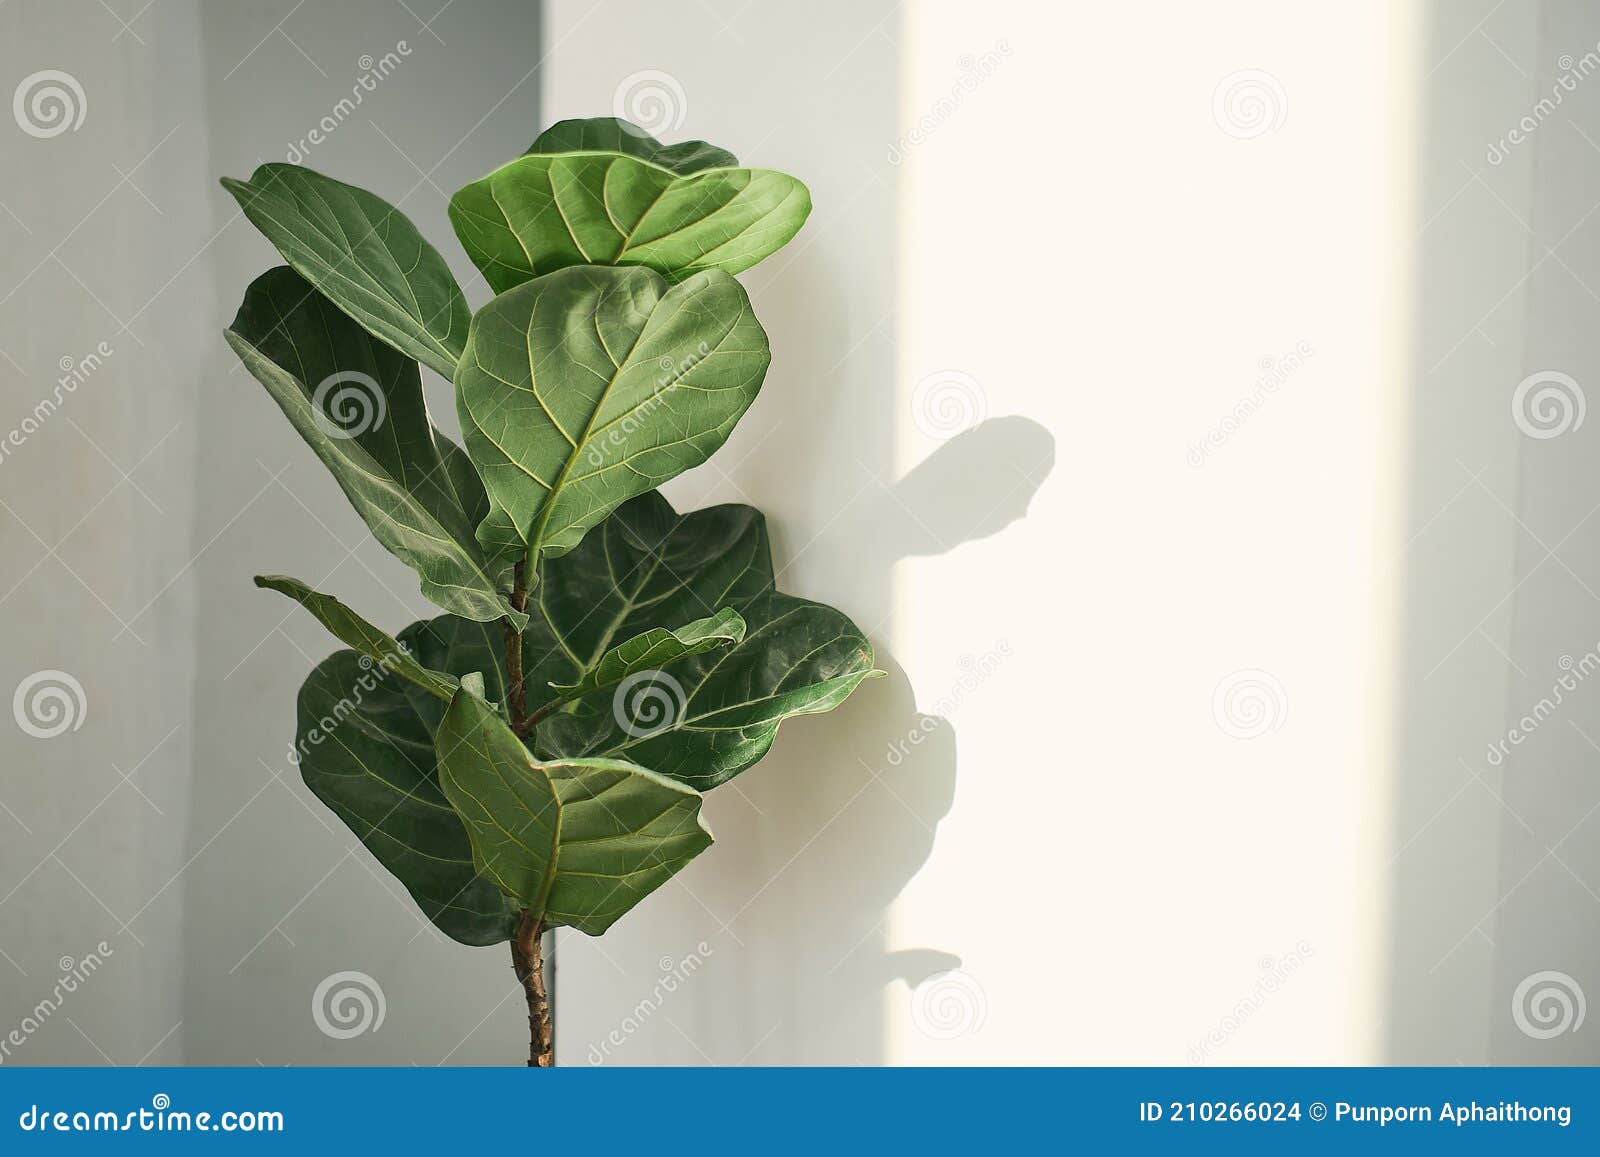 green leaves of fiddle fig or ficus lyrata. fiddle-leaf fig tree houseplant on white wall background,, air purifying plants for